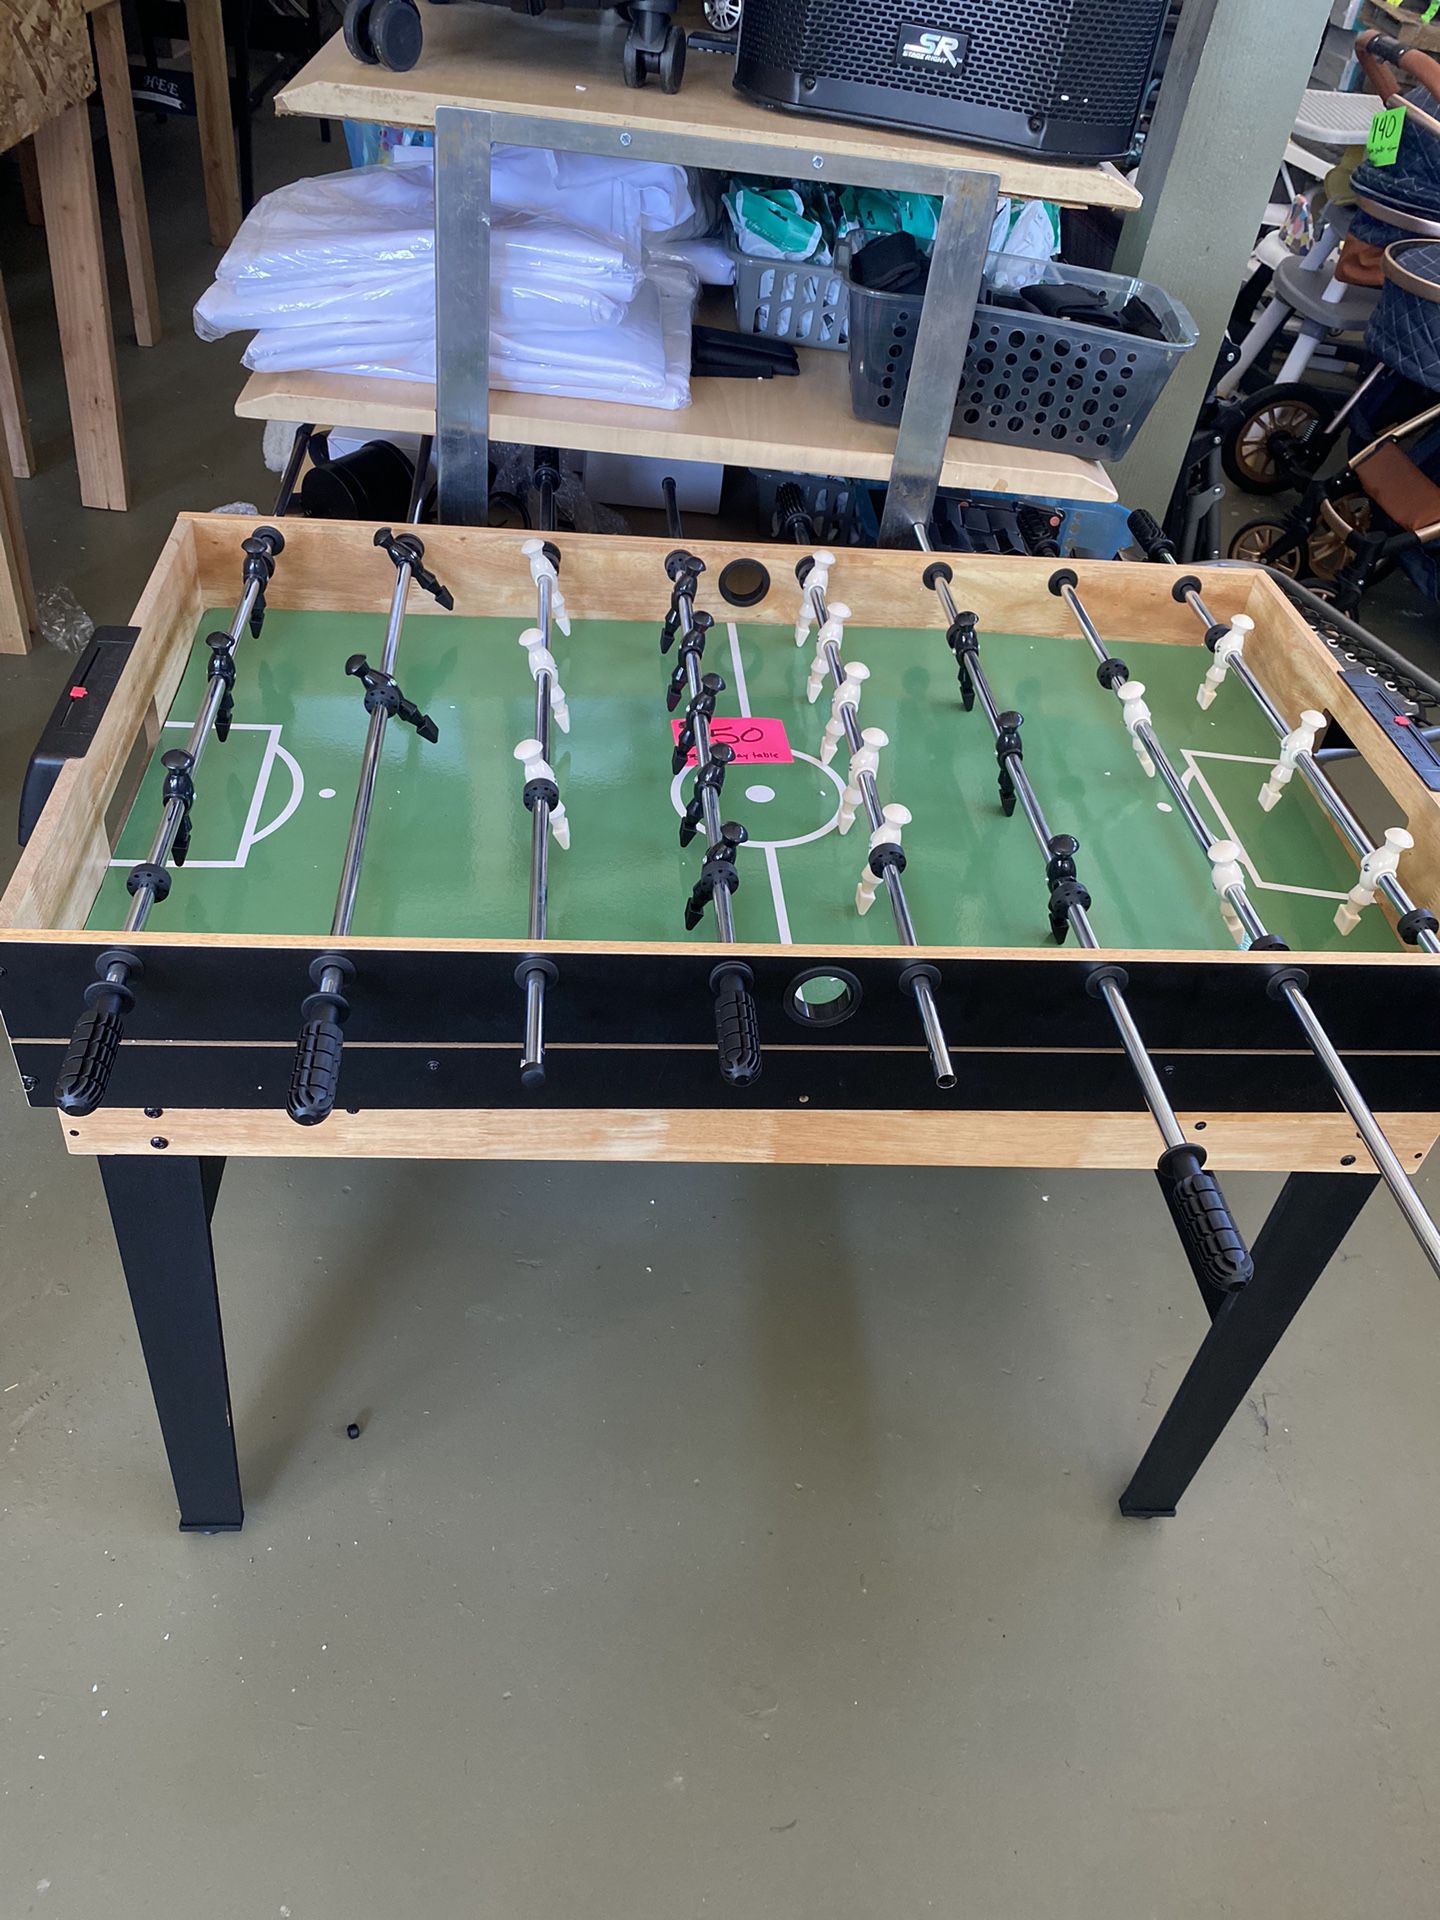 4 IN 1 Multi-Game Table